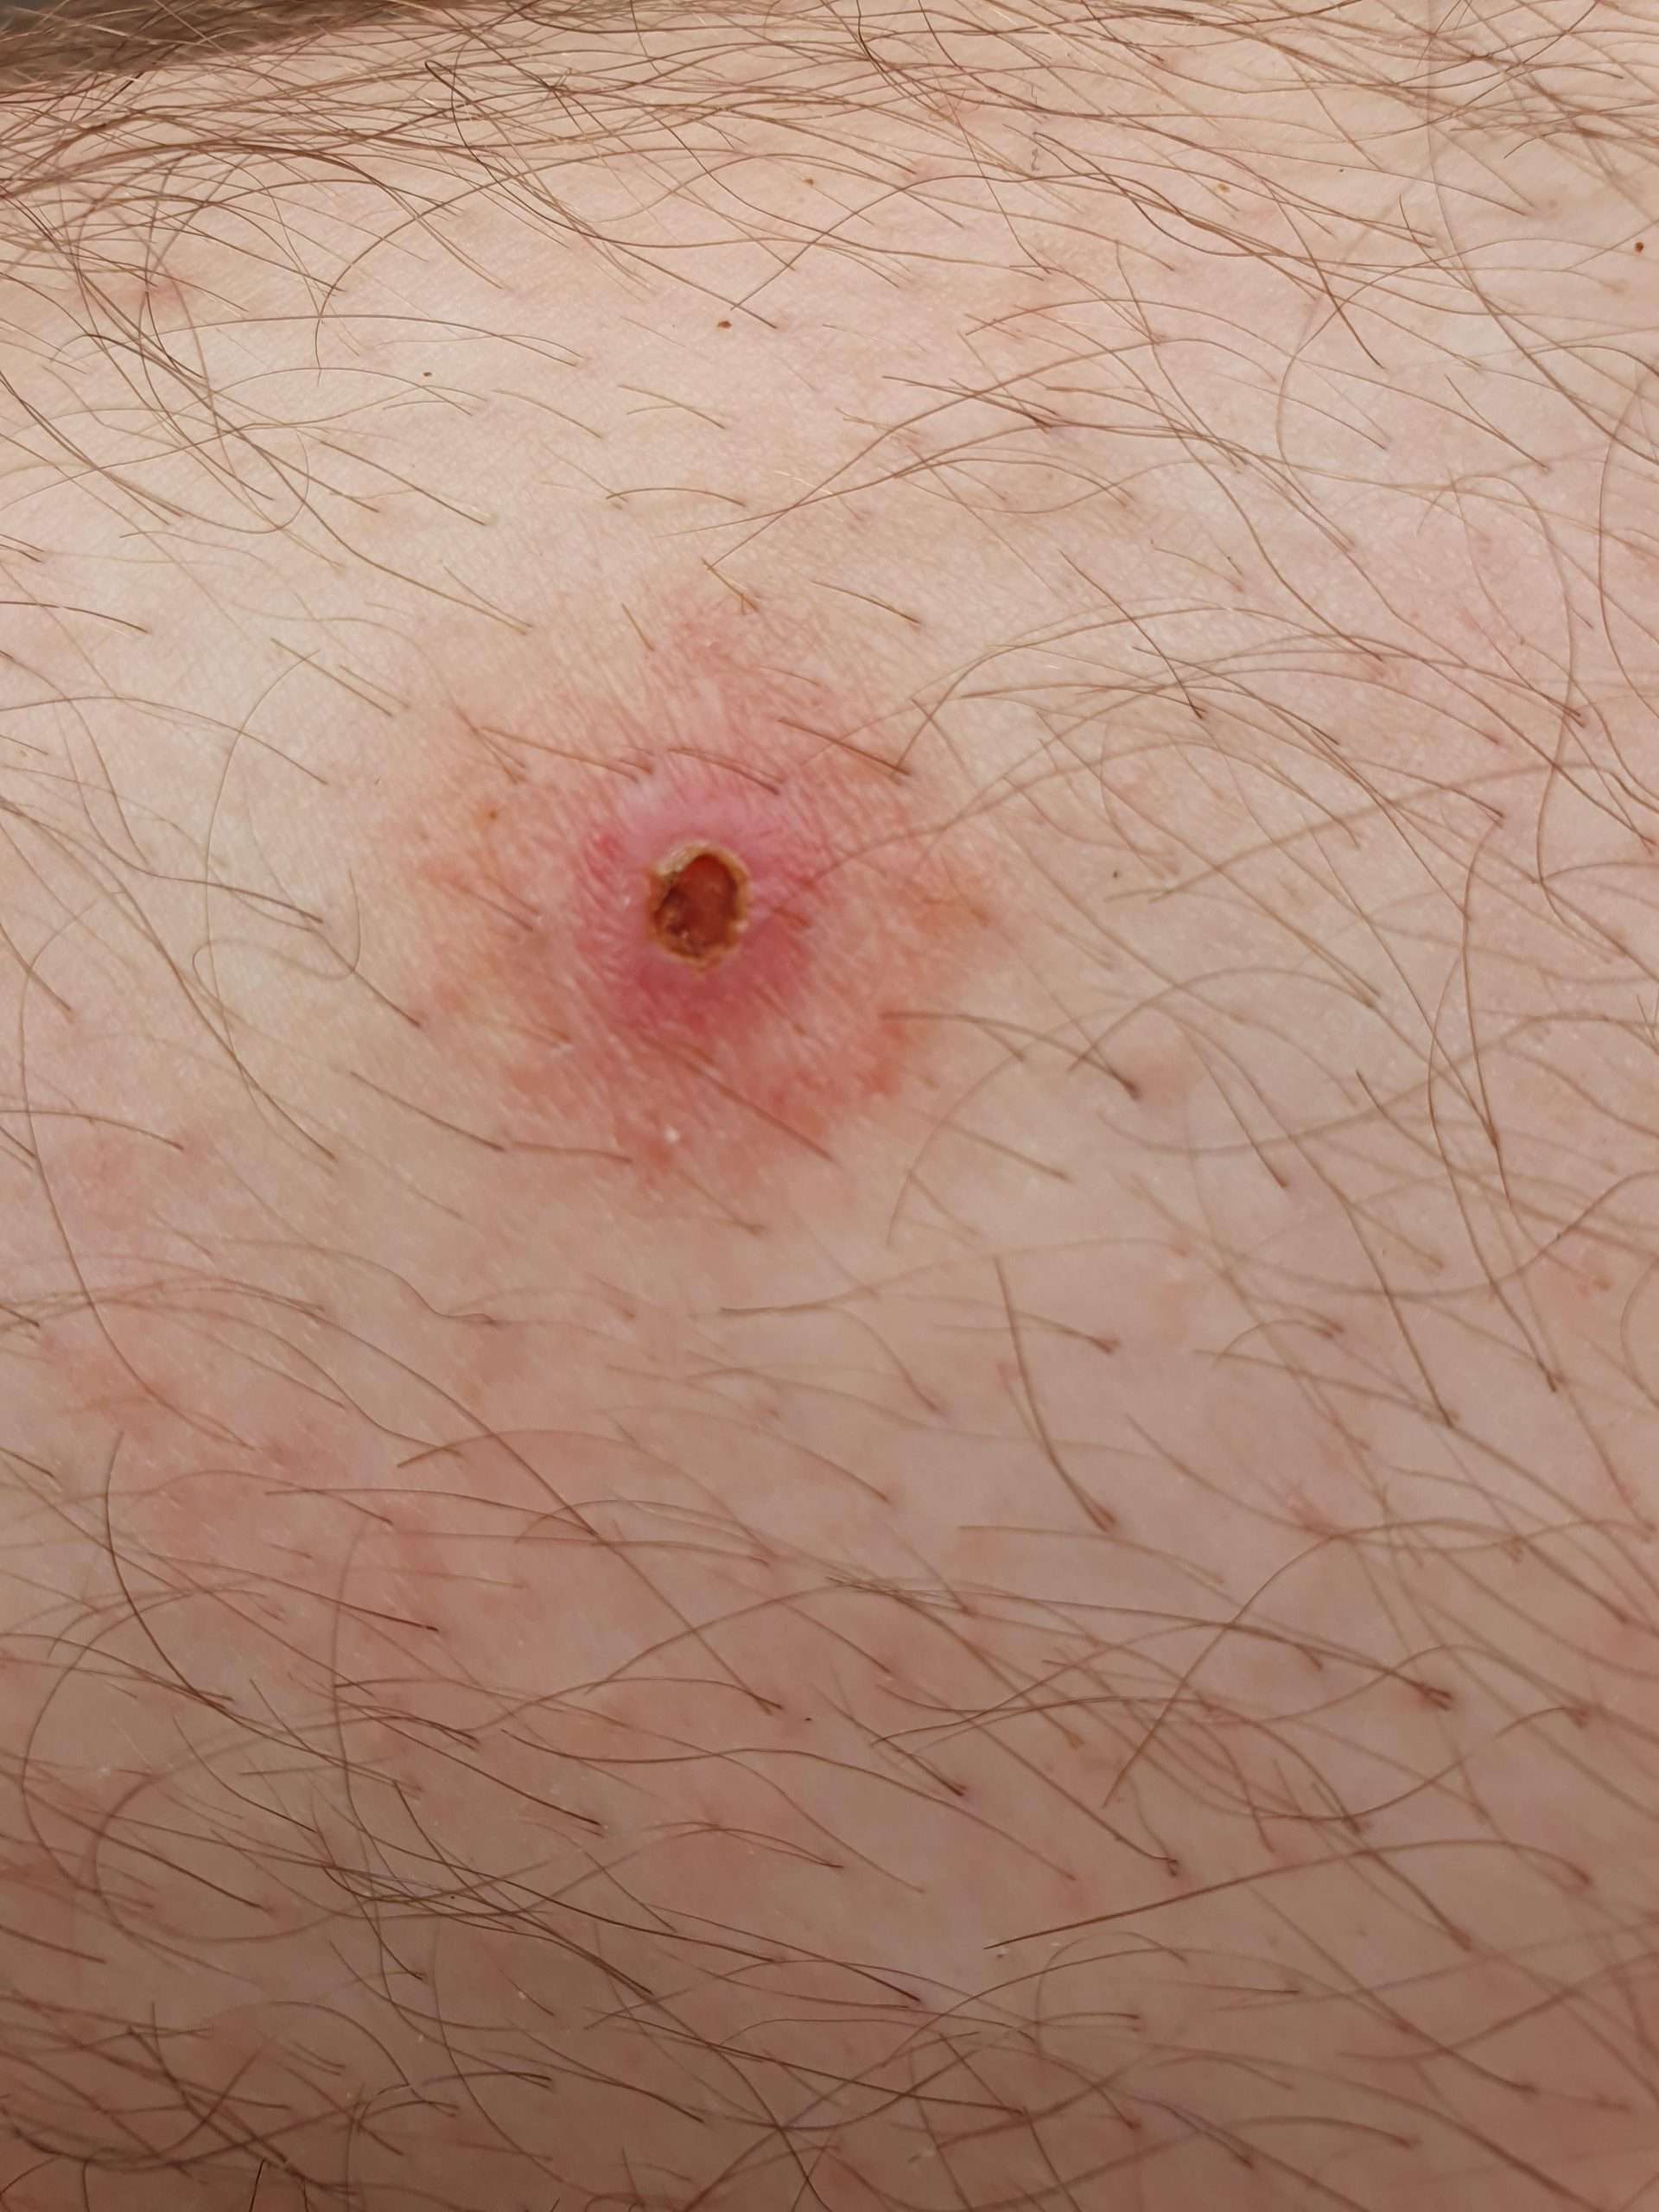 Could this be Lyme disease? : DiagnoseMe